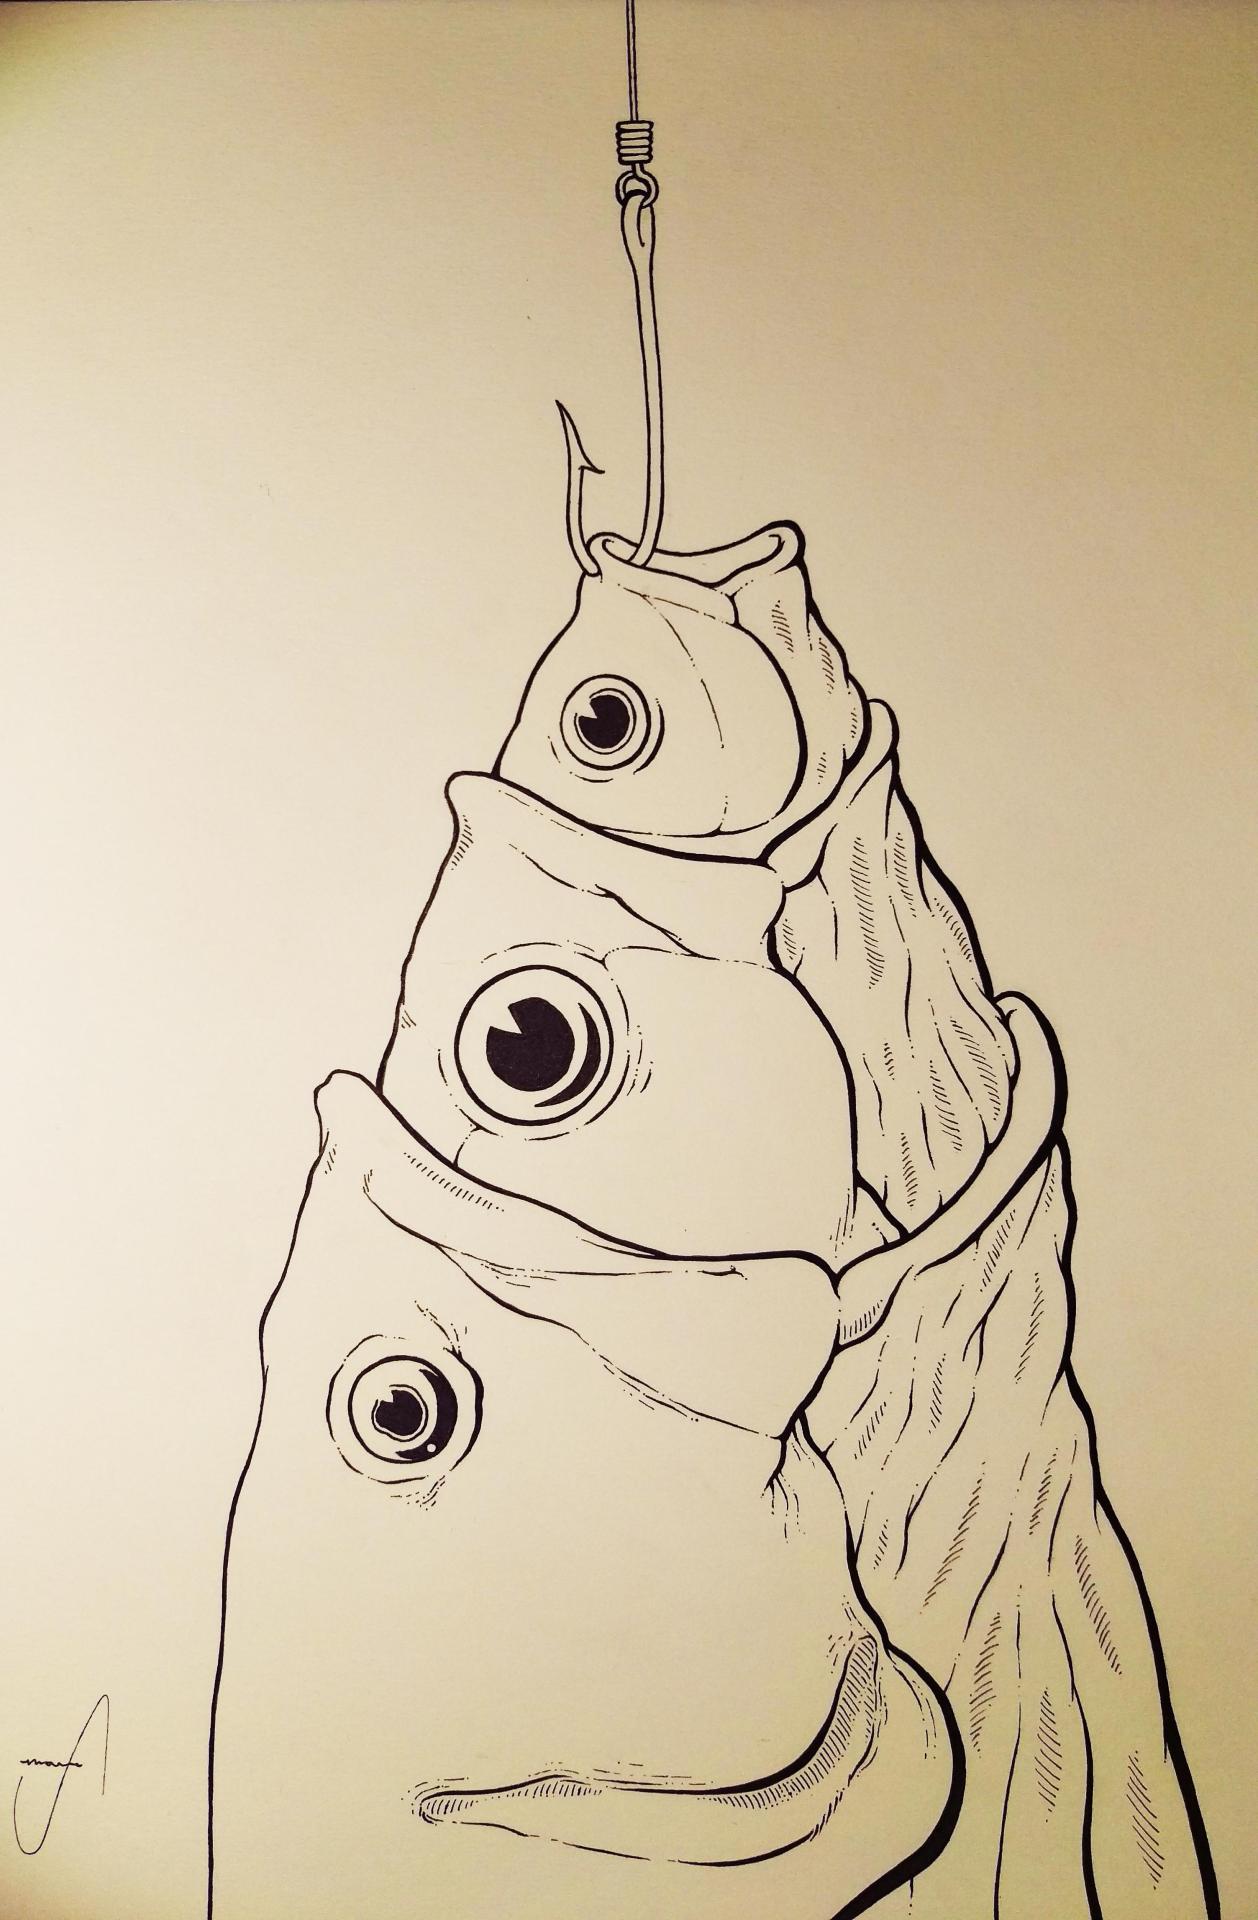 onlyseebeautifulthings:  Catch of the Day, pen on paper, 3007x4591 pixels via /r/Art